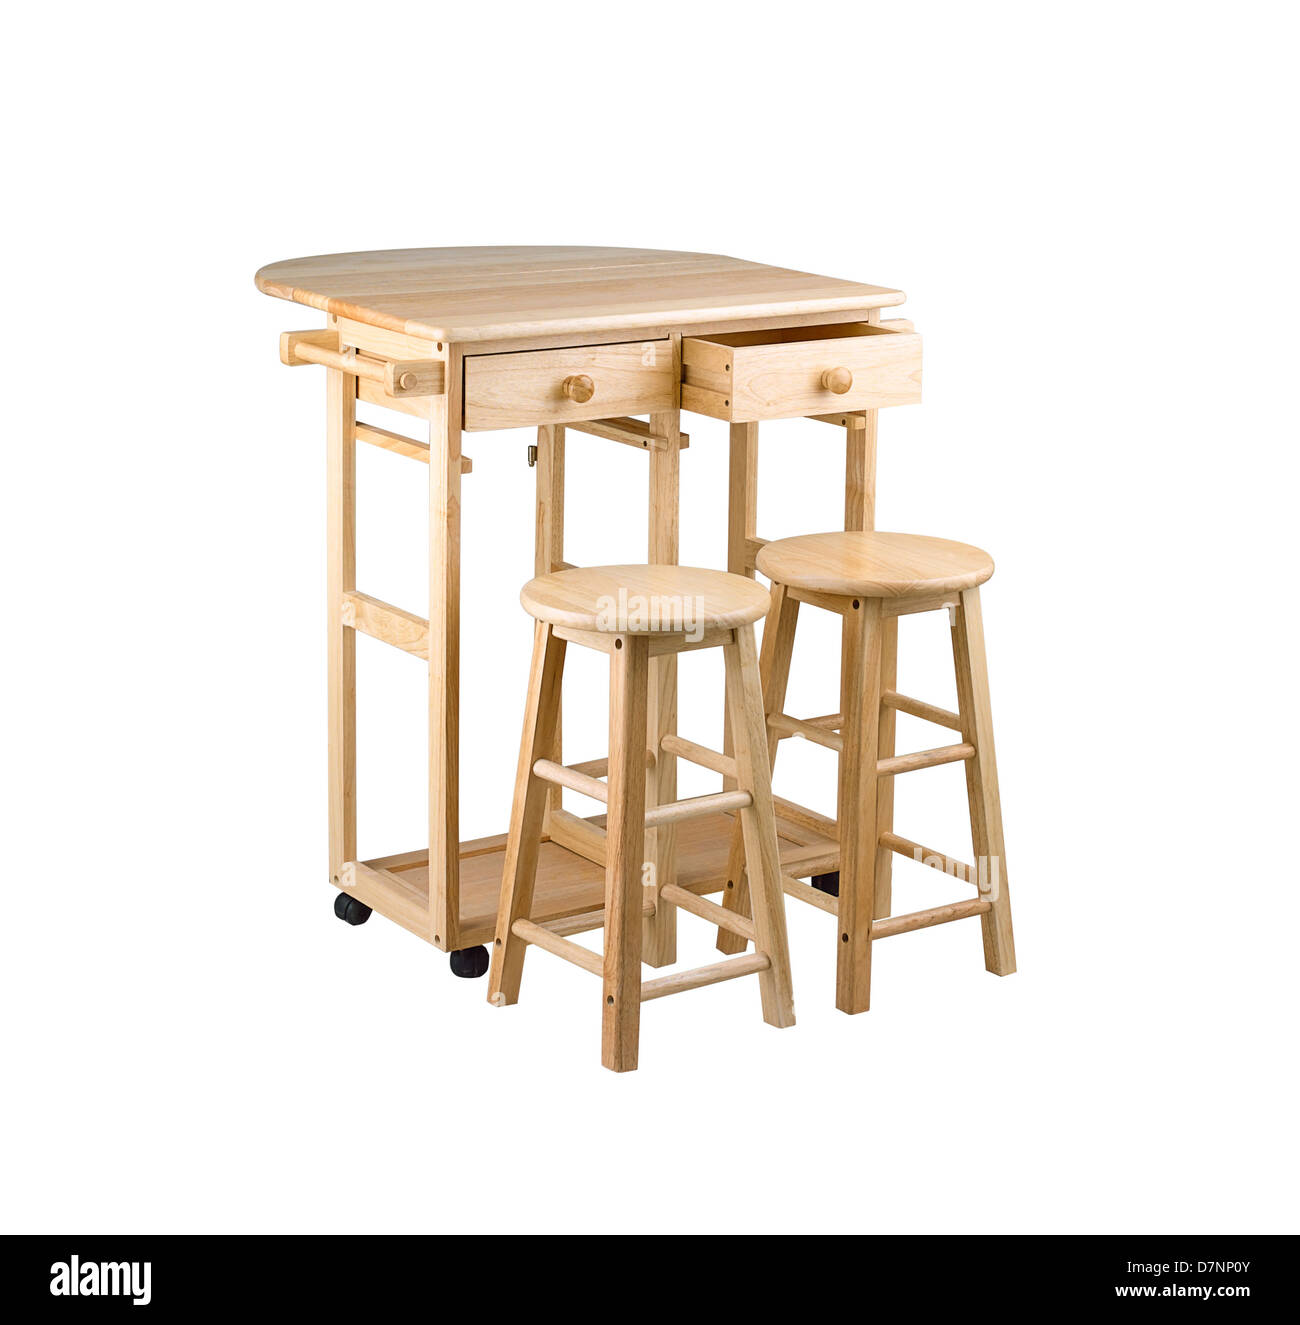 Folding And Movable Wooden Table With Drawers For Small Kitchen